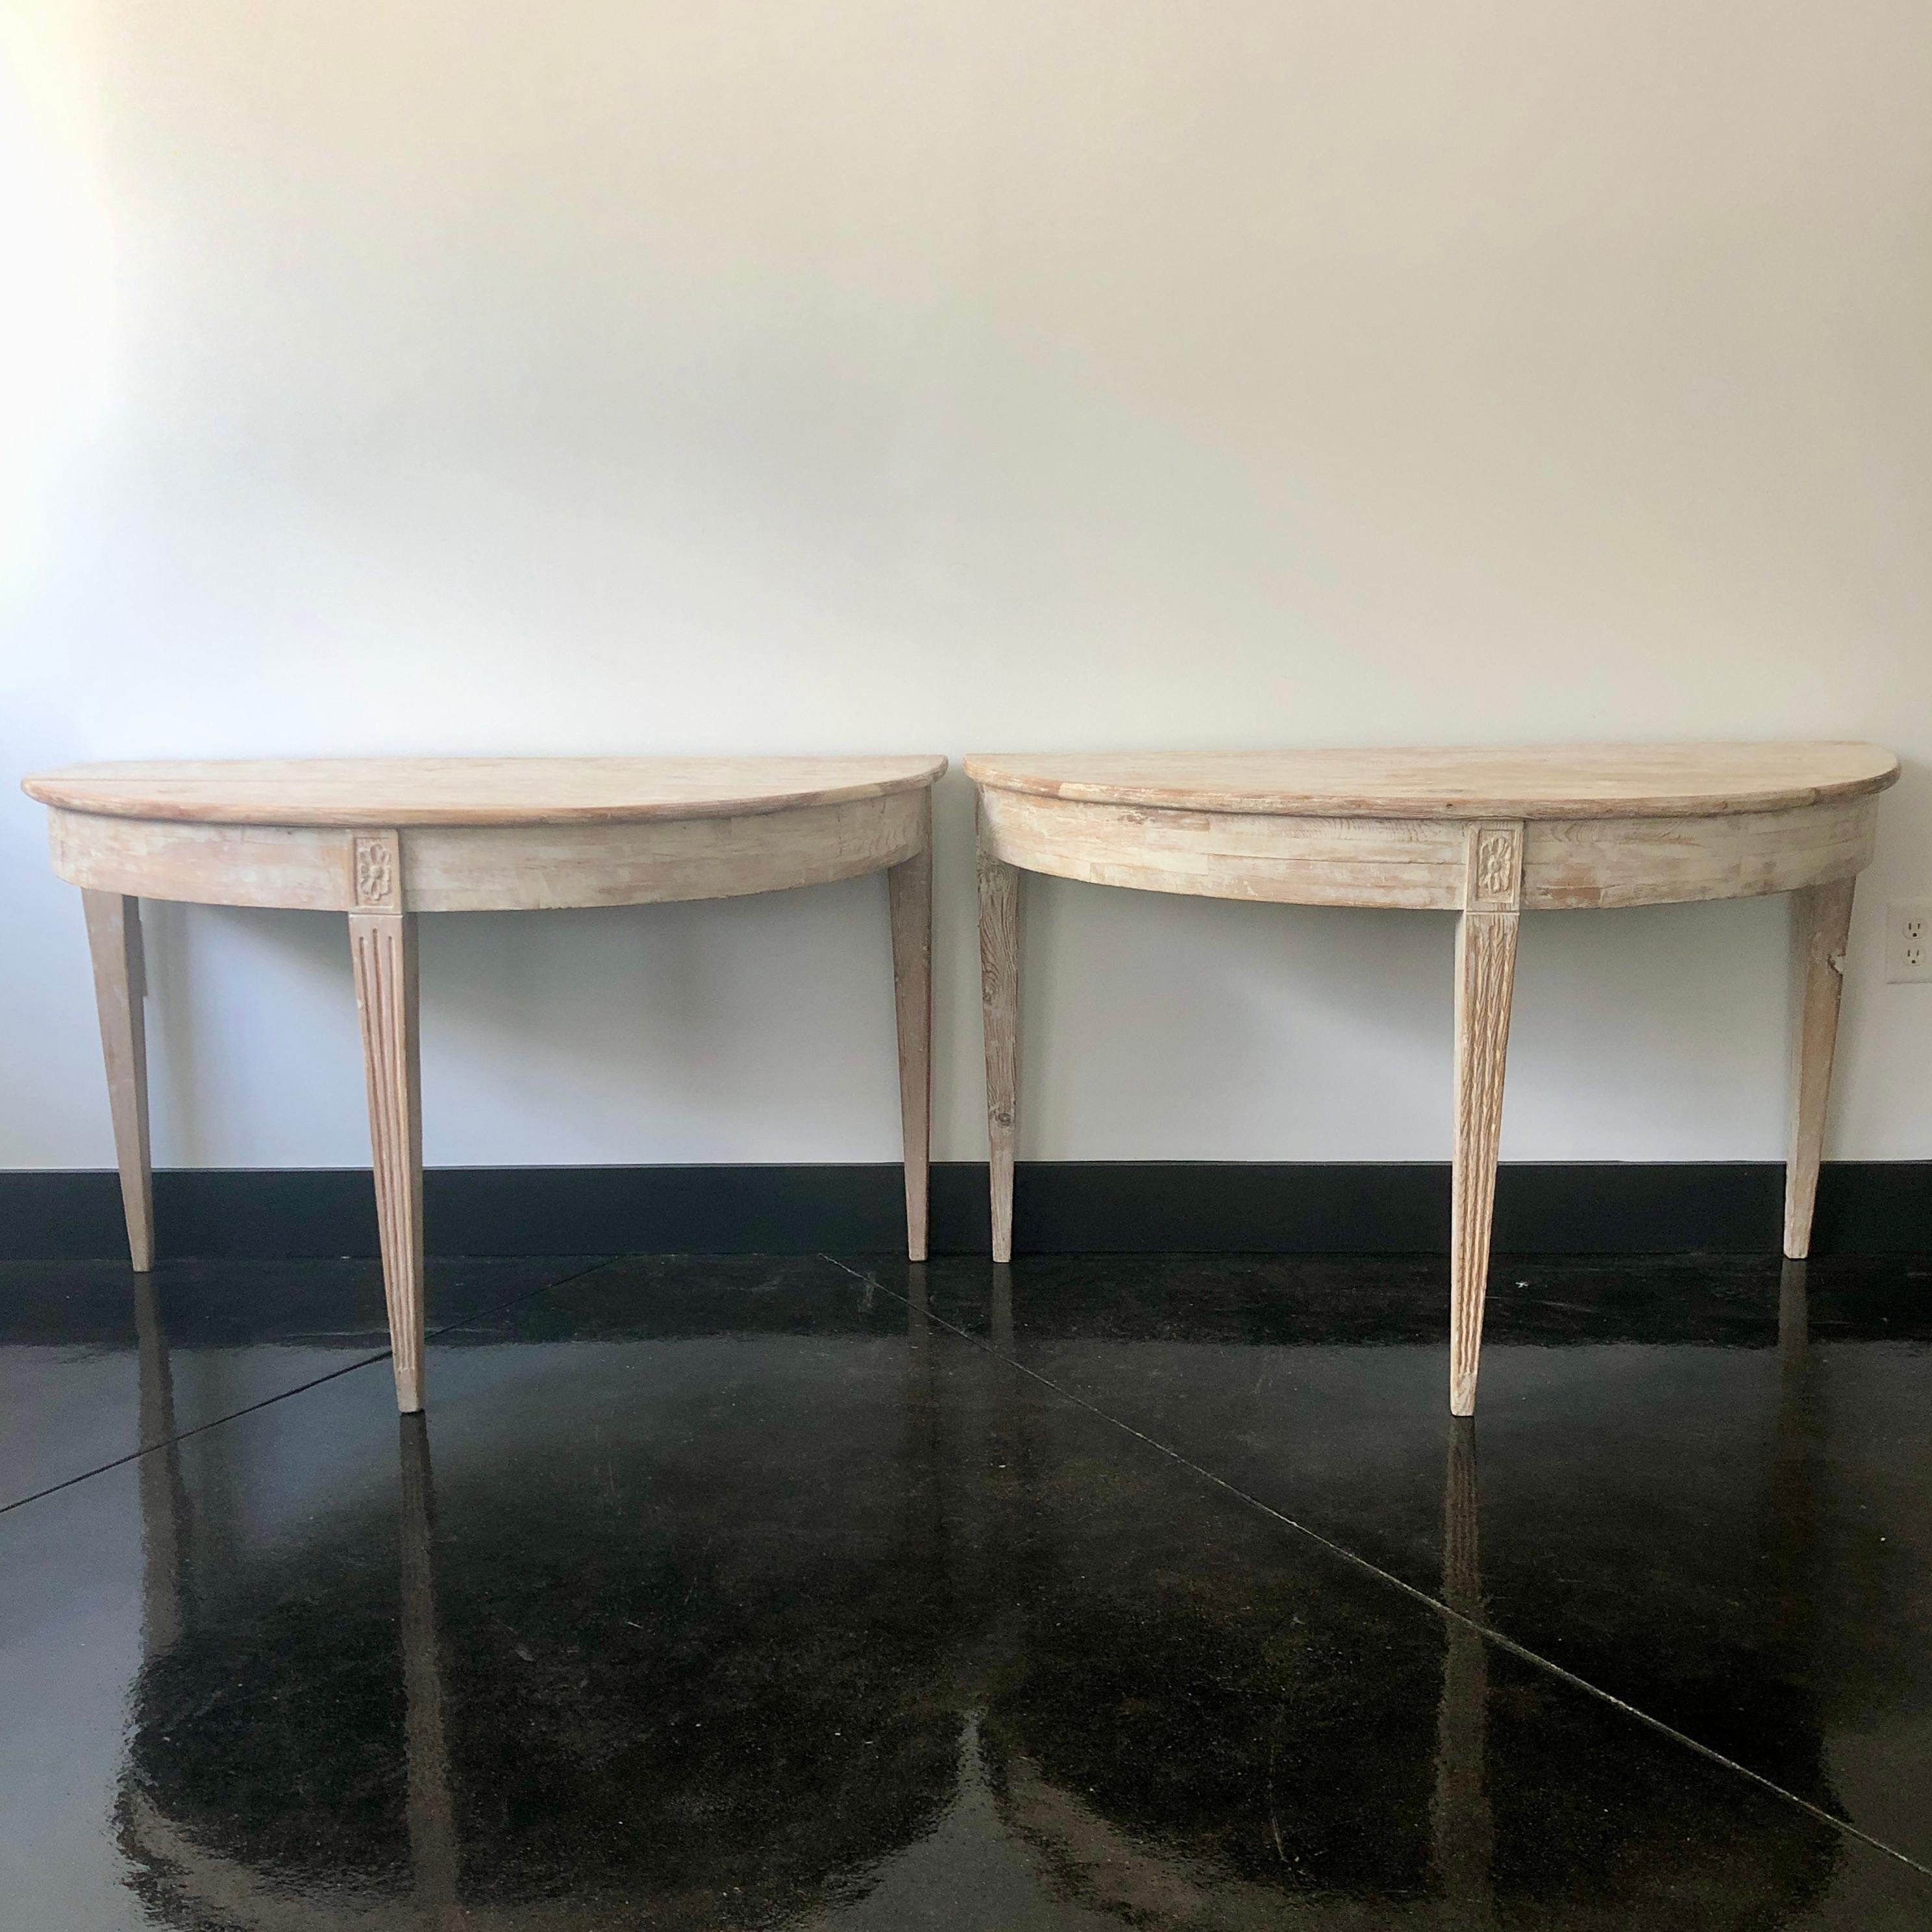 Pair of Swedish Gustavian period demilune console tables with wide rounded apron and florets on the corner blocks. Elegant tapered and fluted legs.
Many layers of newer paint scraped to its most original finish.
Stockholm, Sweden, circa 1820.